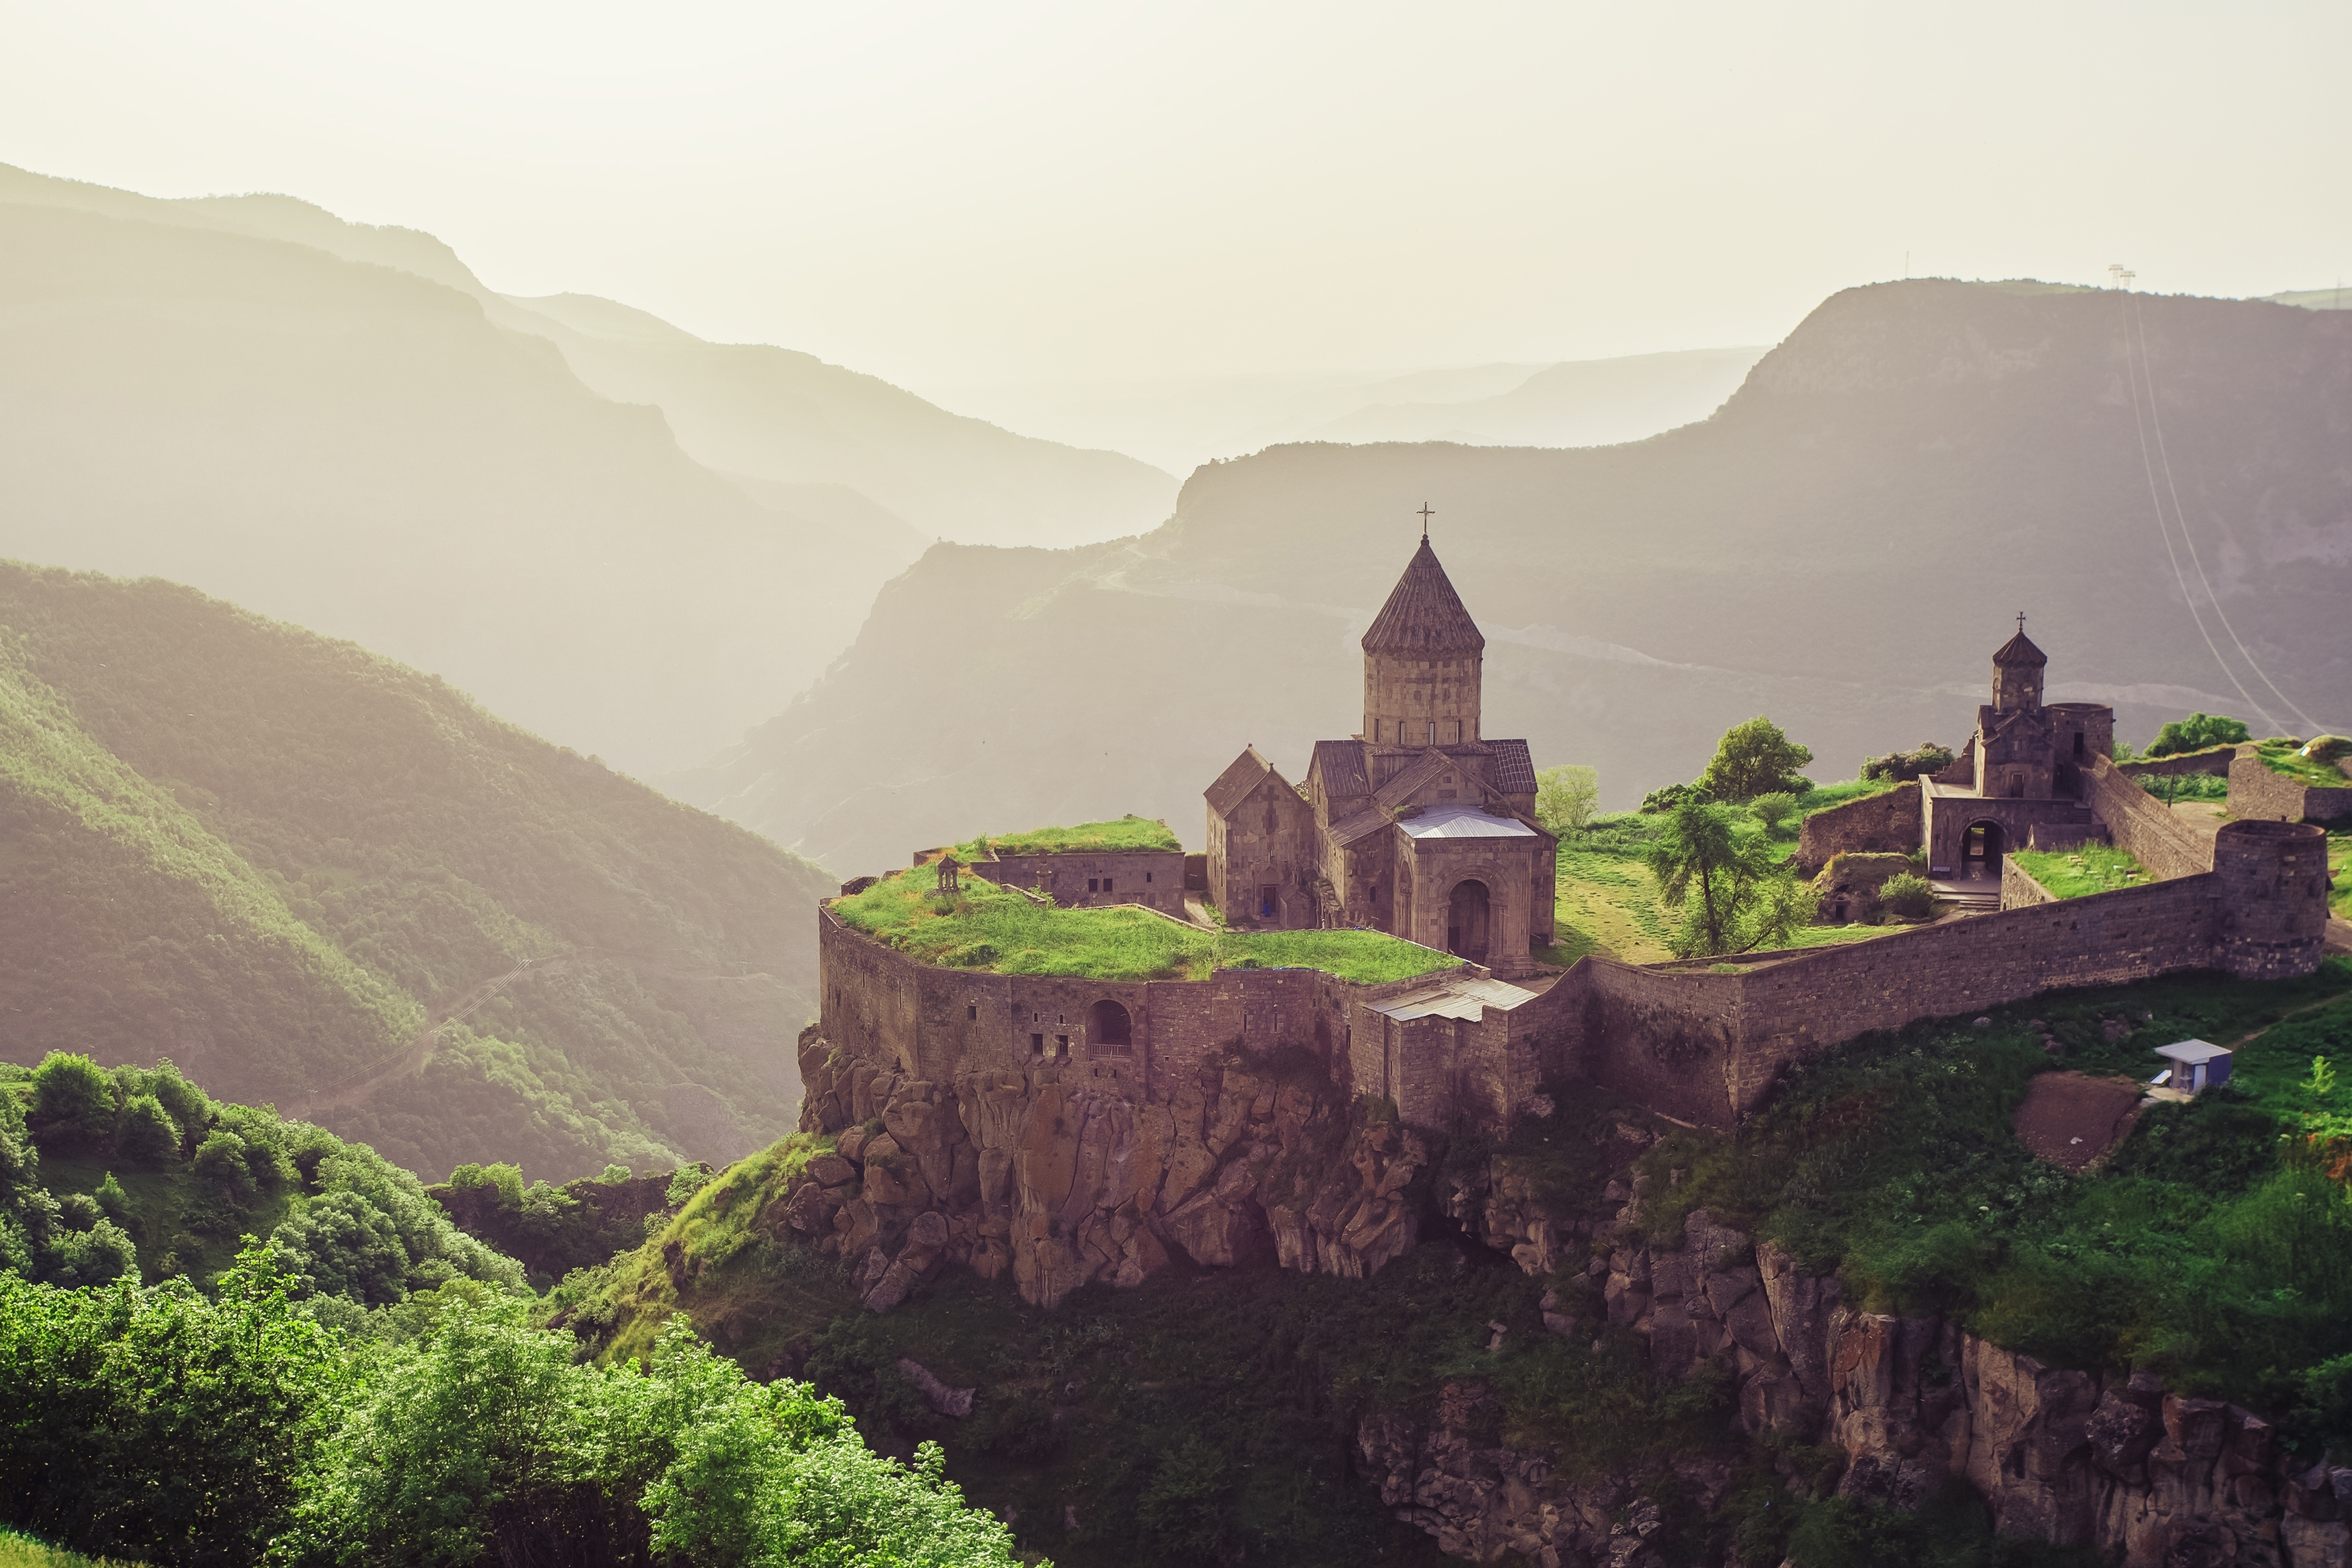 Armenian citizenship allows foreigners to live in a beautiful place